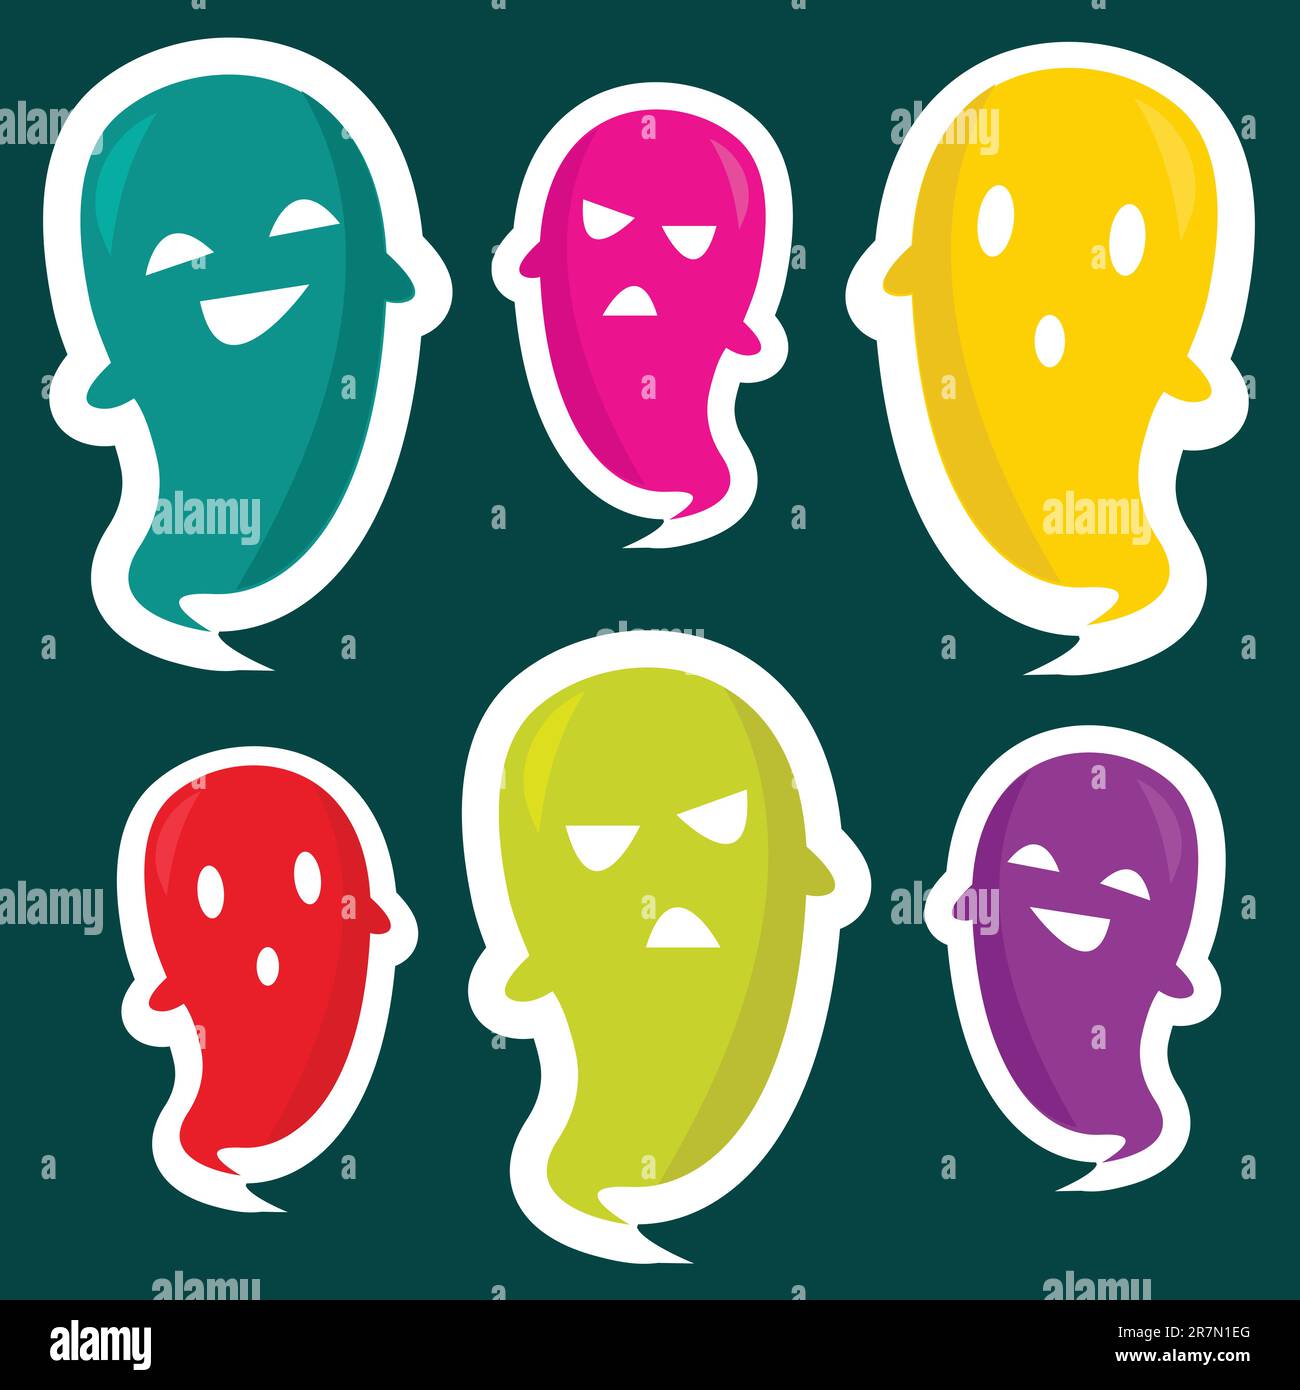 Cute ghost stickers, vector illustration Stock Vector